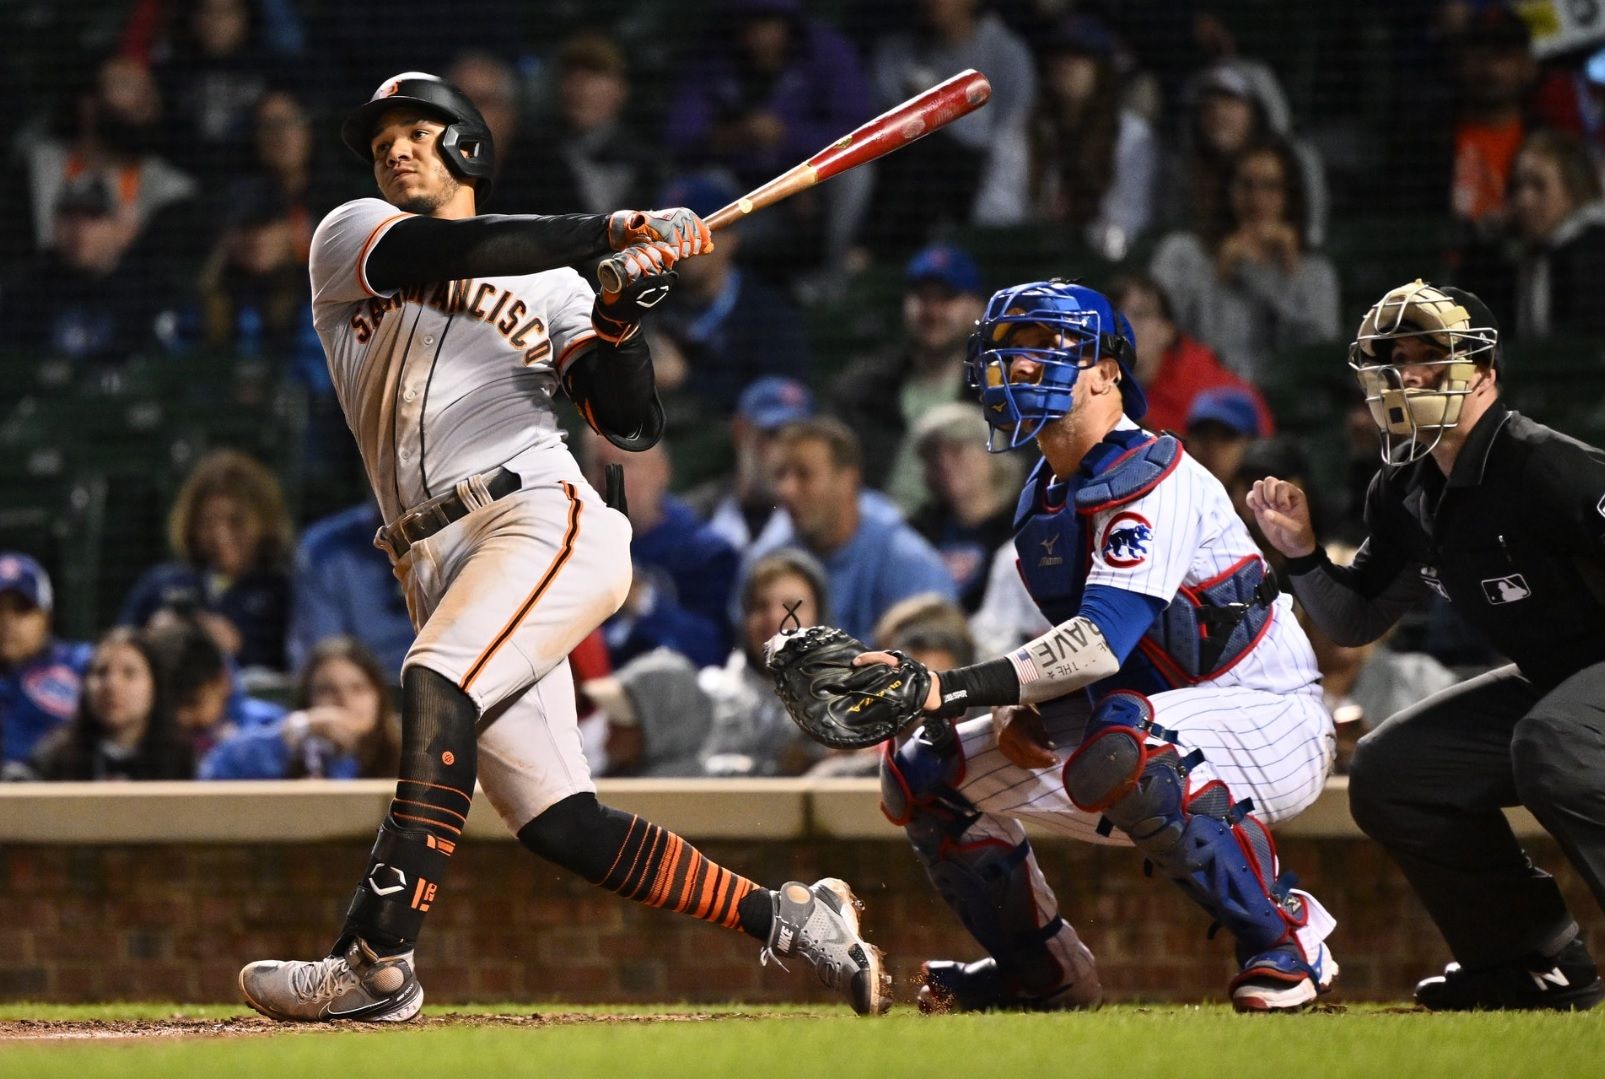 Estrada, Flores homer in late innings, Giants beat Cubs 4-2